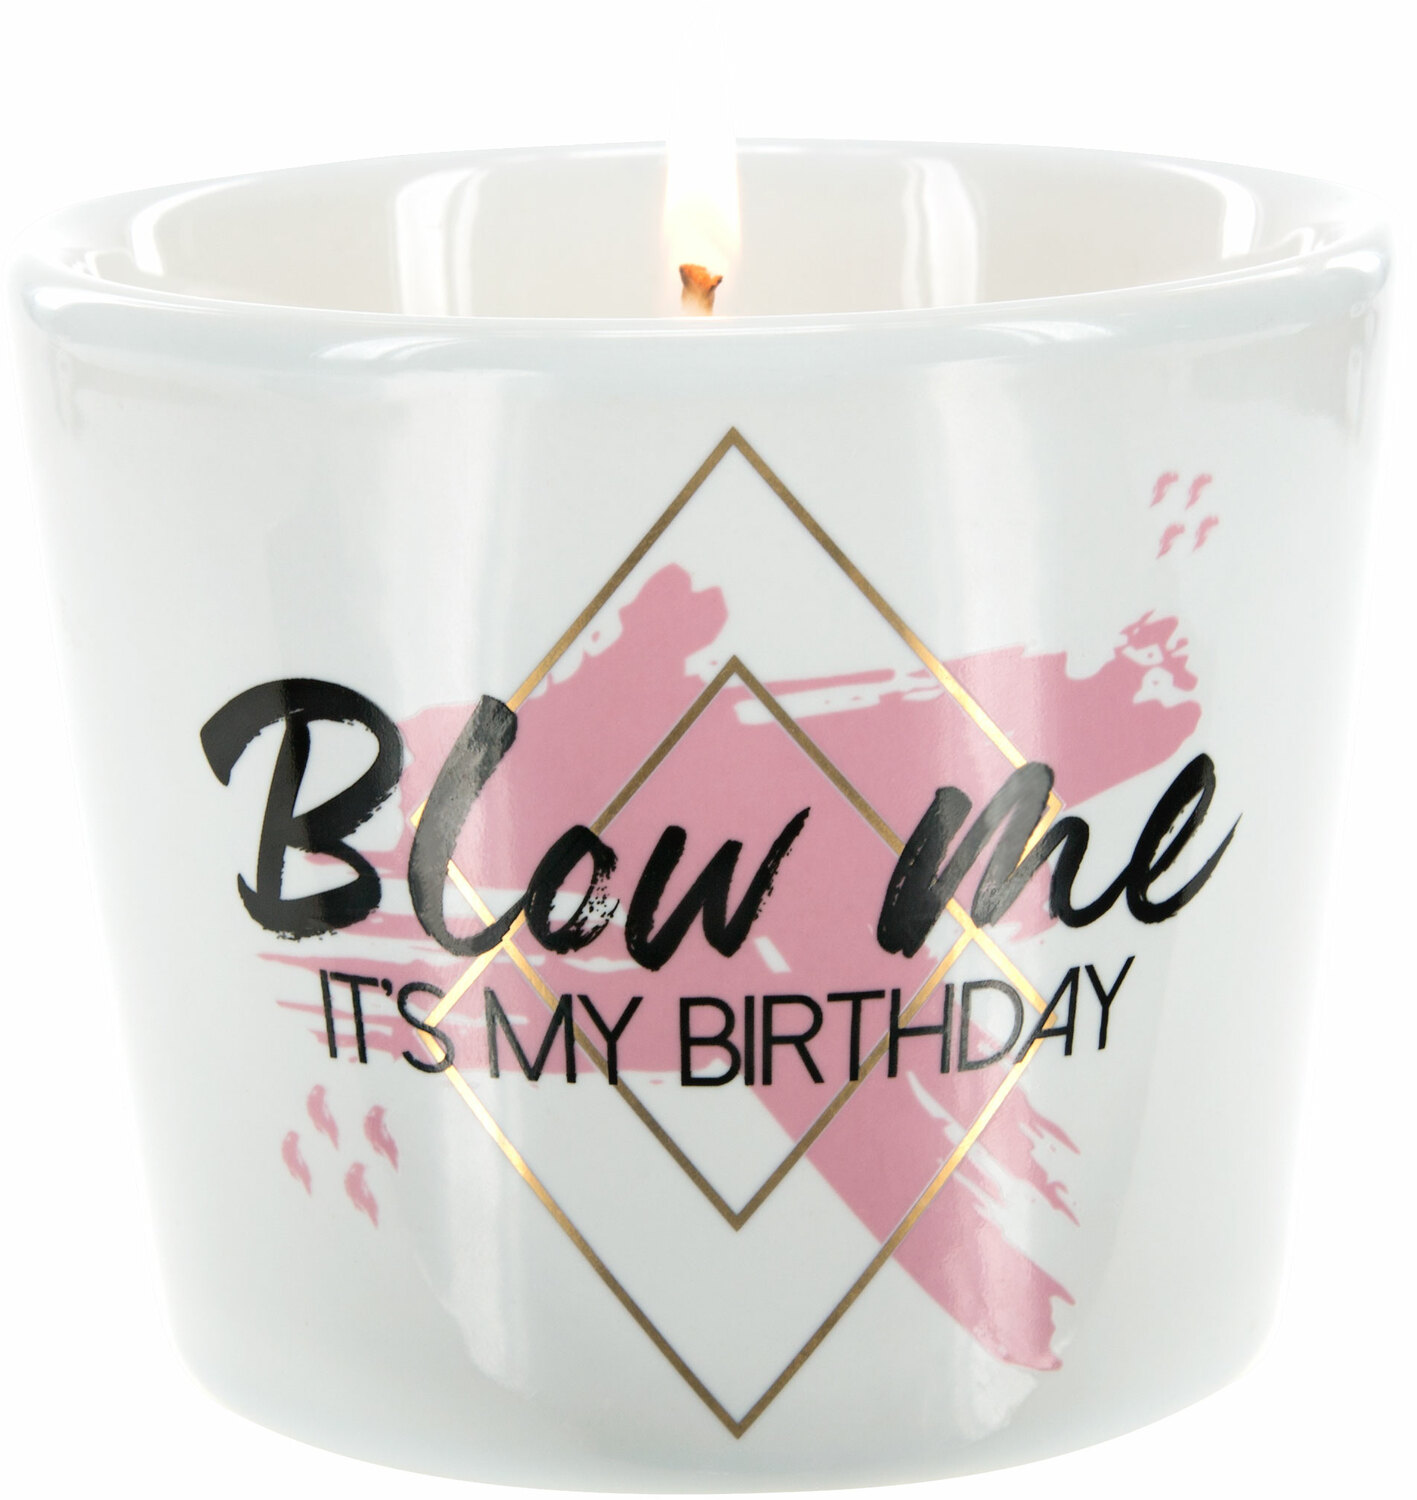 Blow Me by Salty Celebration - Blow Me - 8 oz Soy Wax Candle
Scent: Tranquility